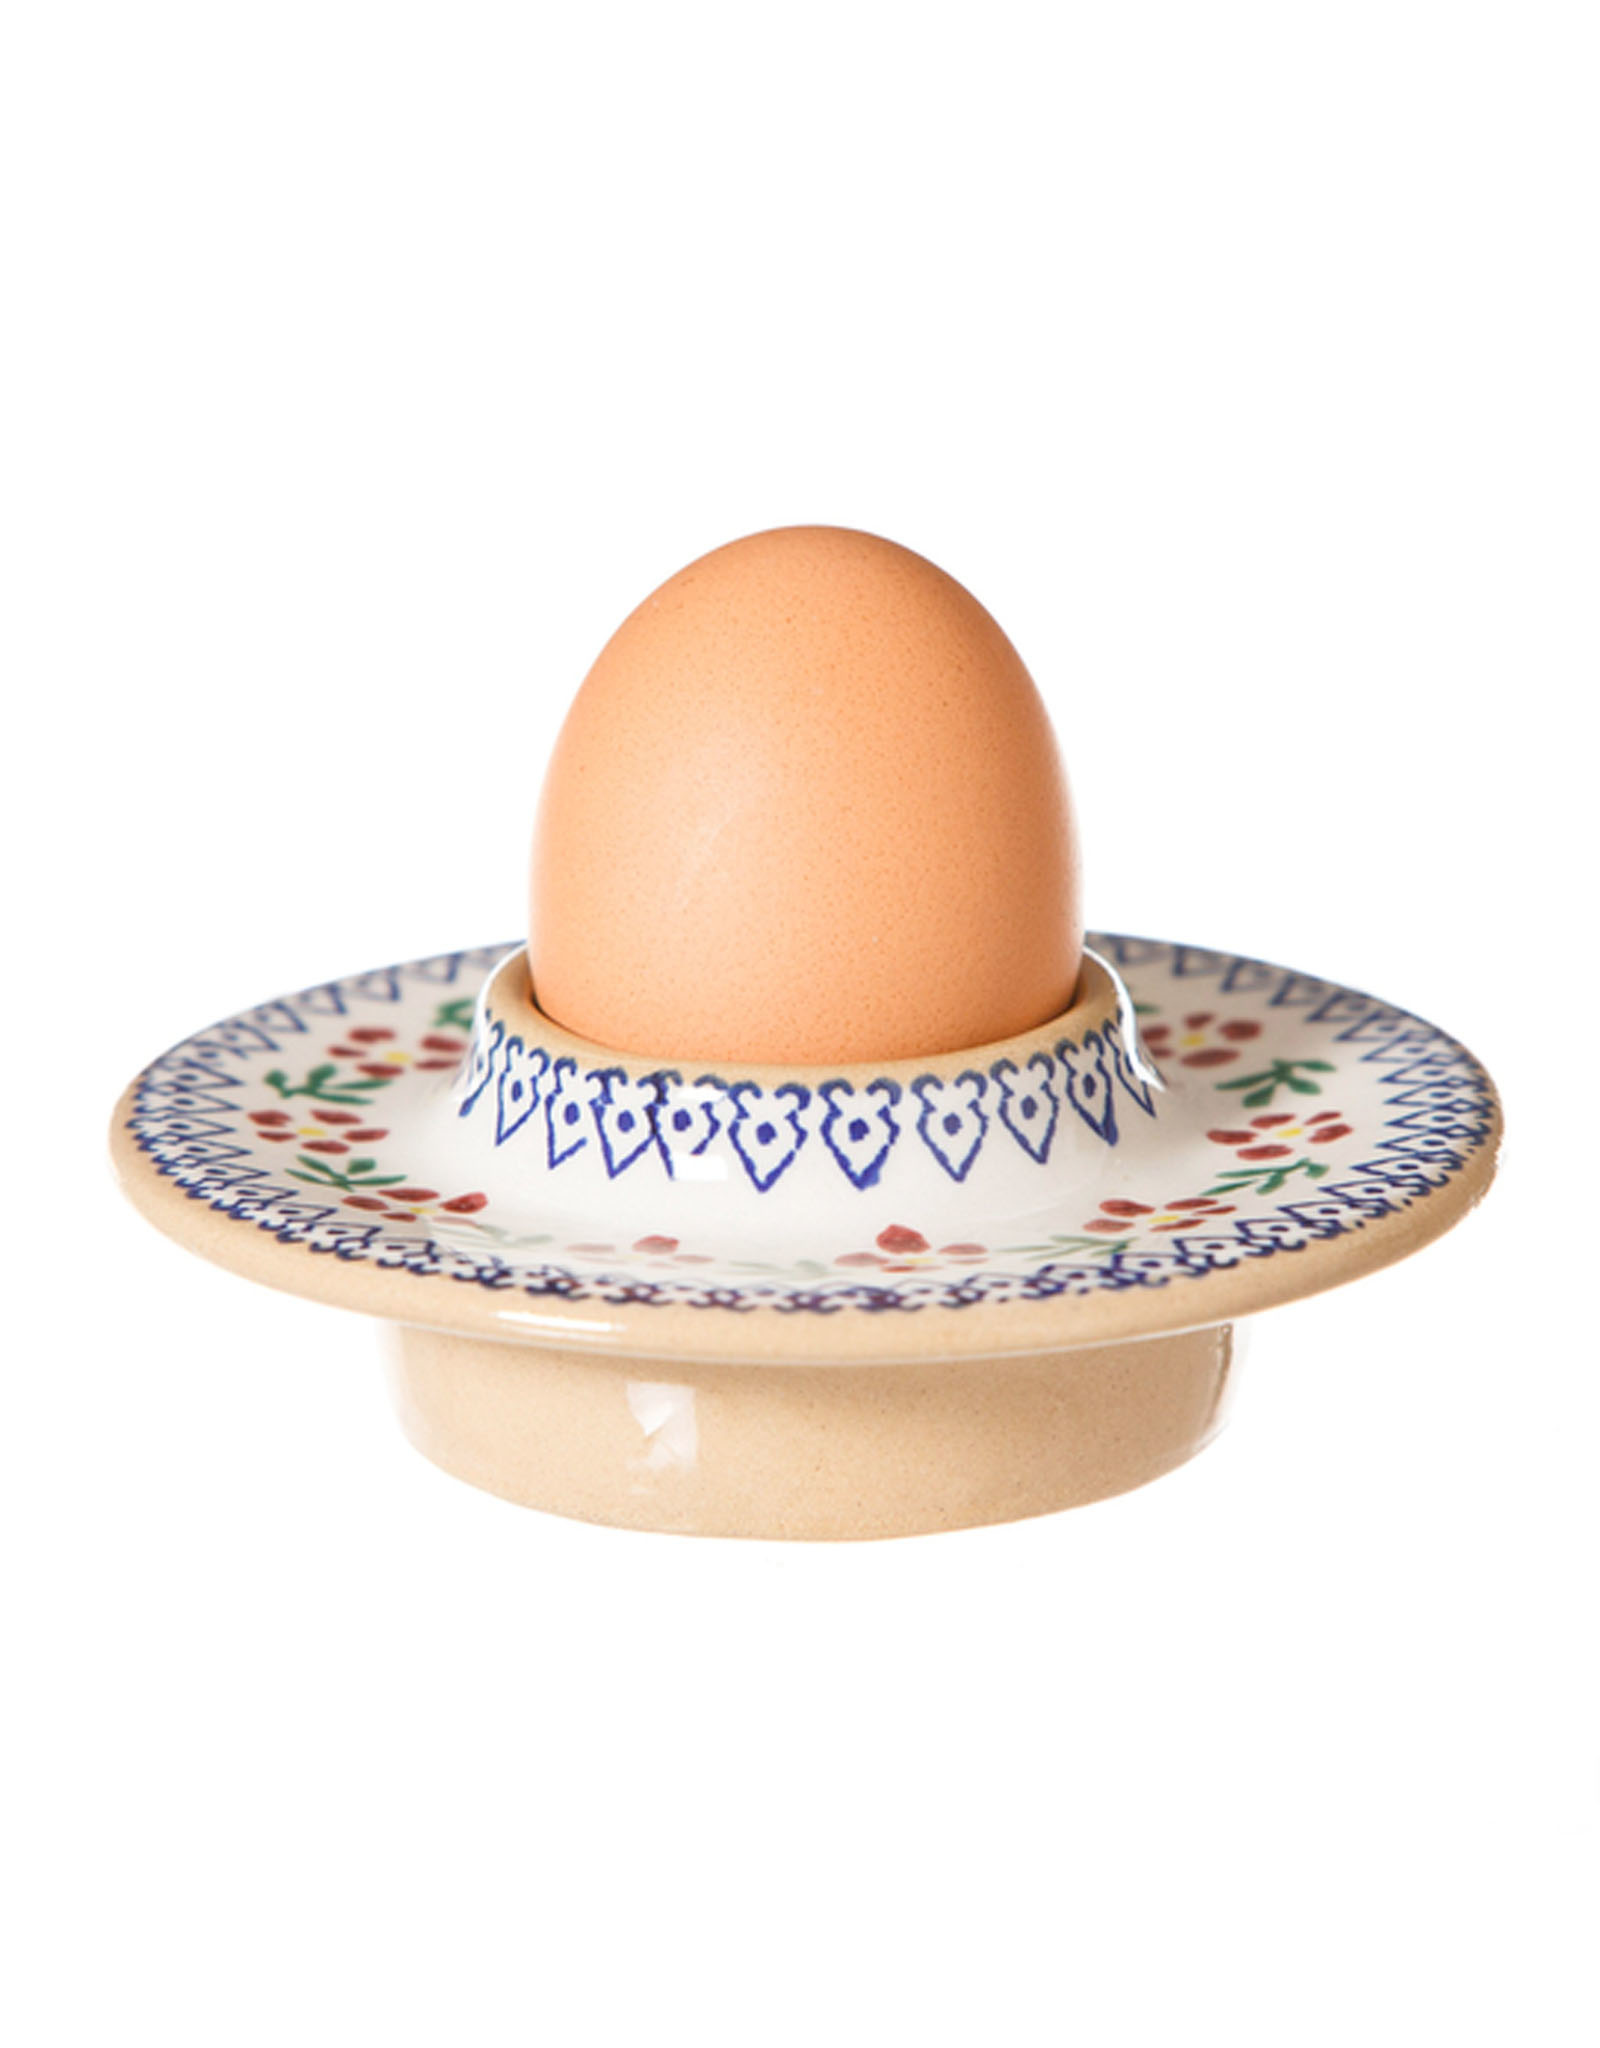 KITCHEN & ACCESSORIES NICHOLAS MOSSE EGG CUP - Old Rose